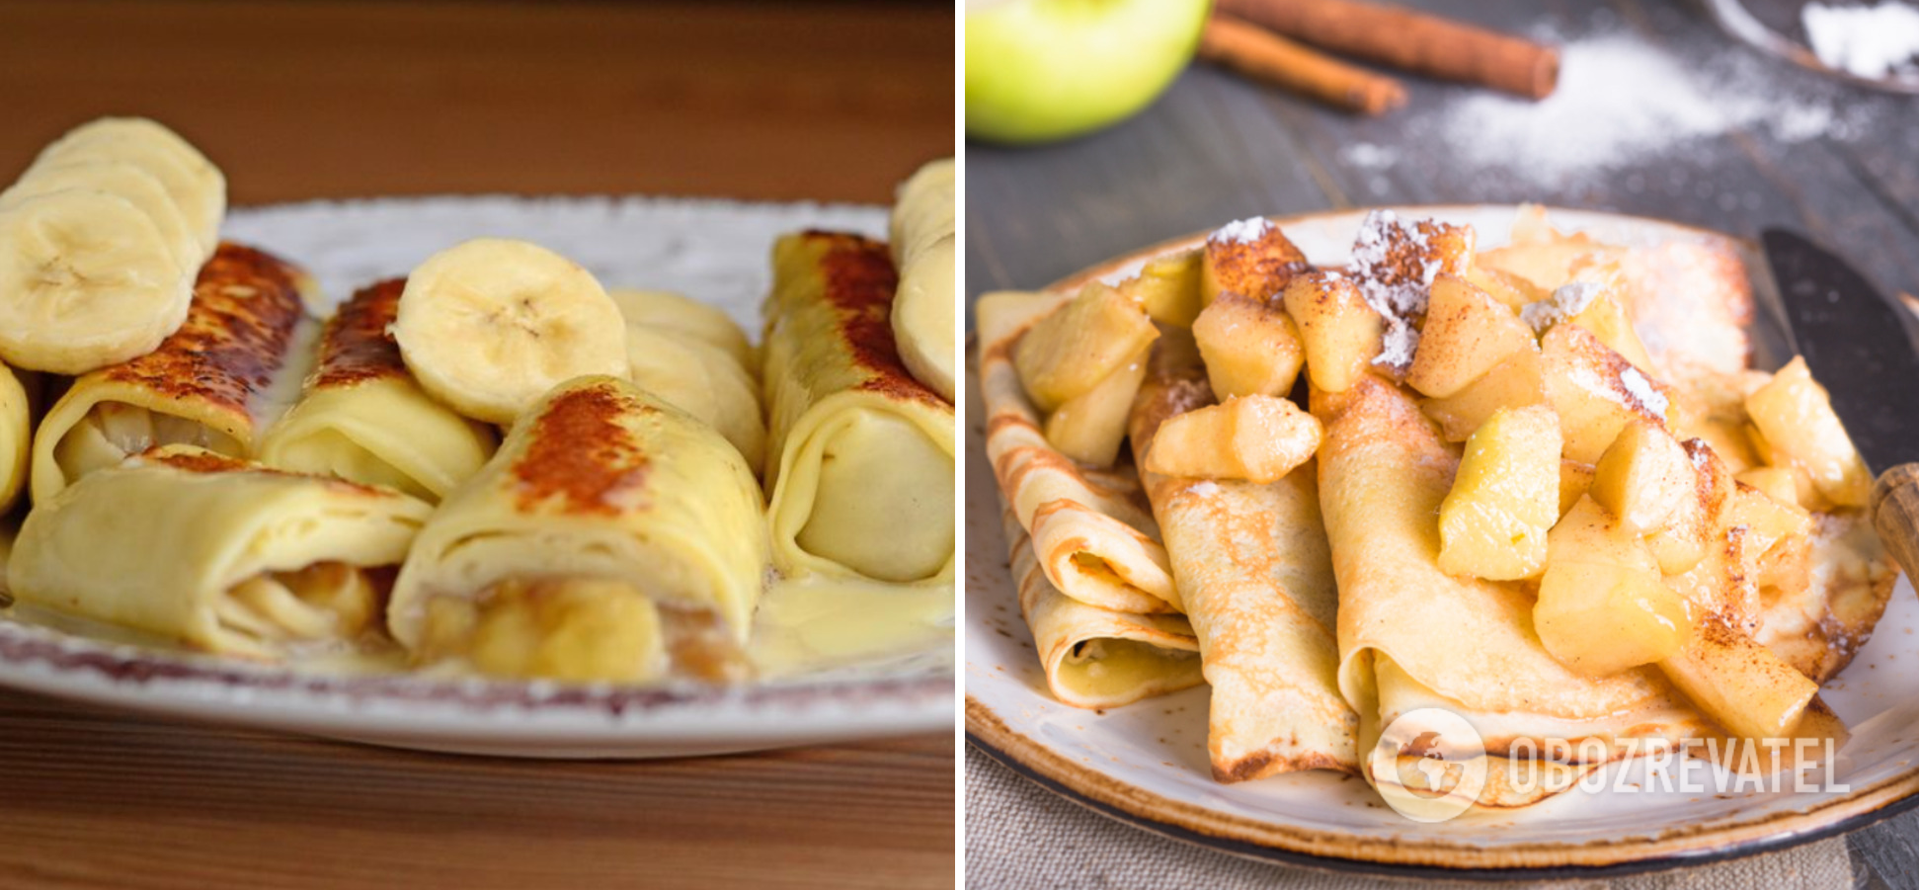 Pancakes with banana and apple